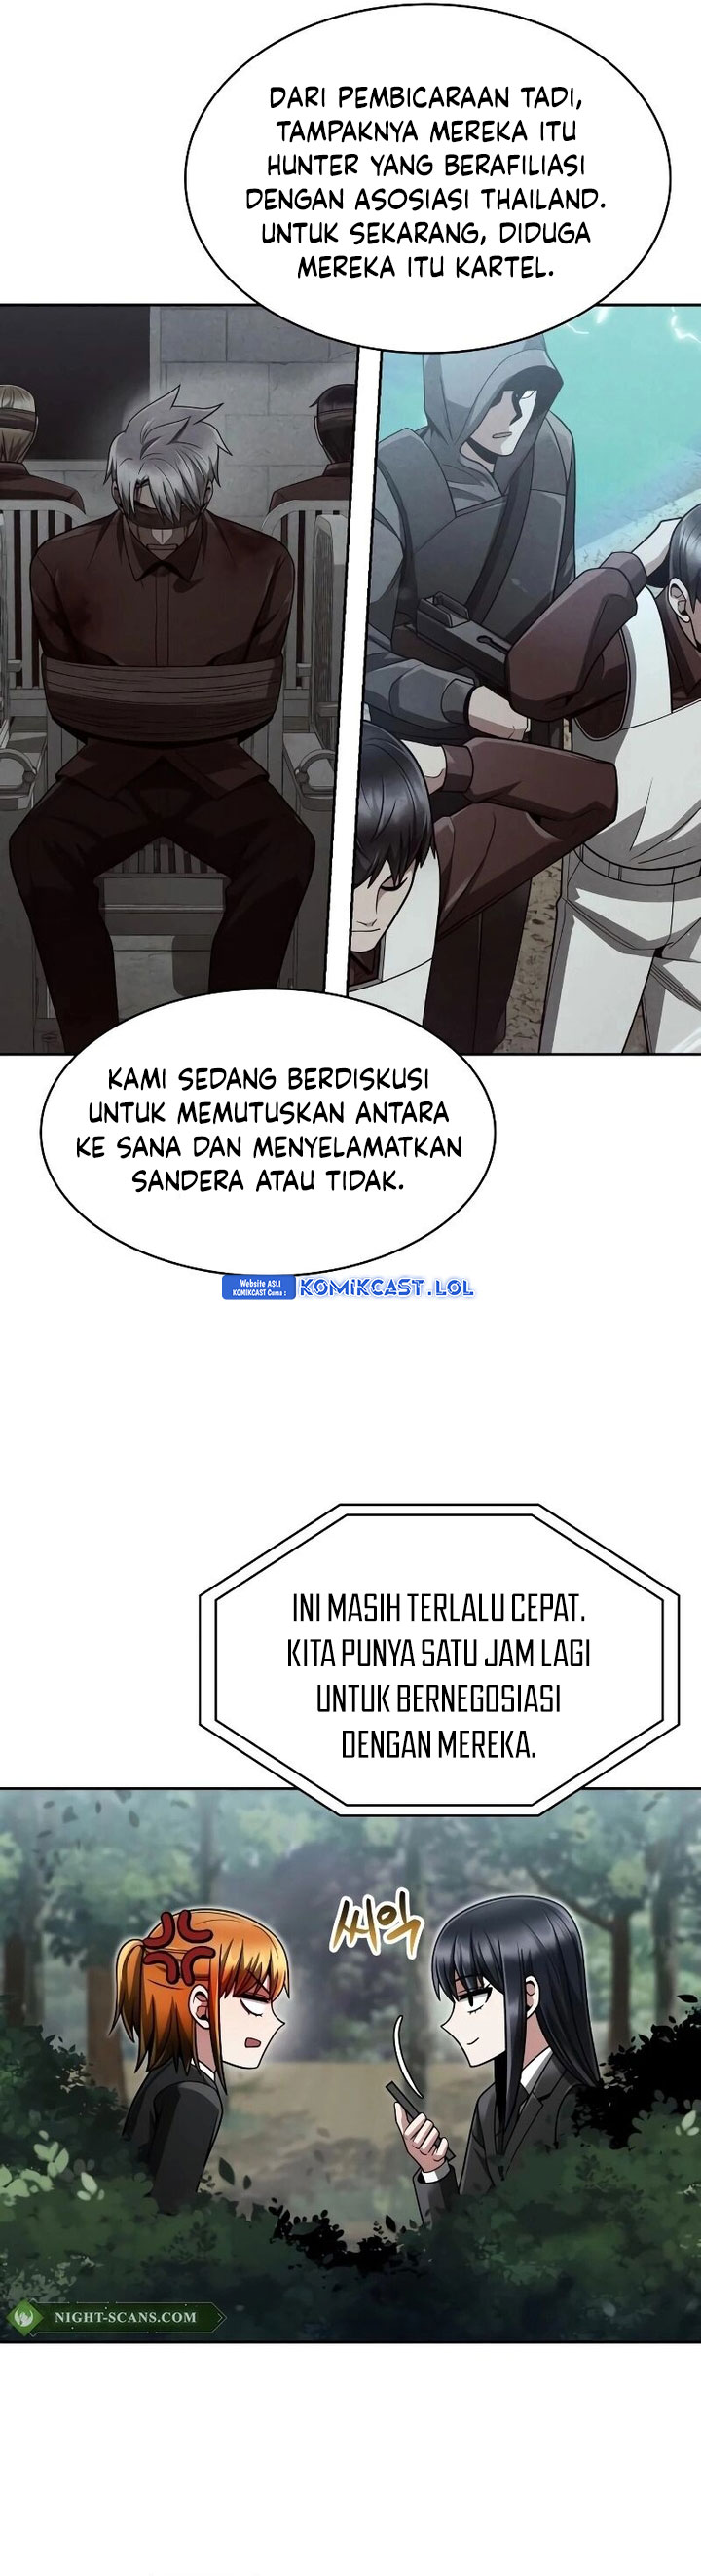 Dilarang COPAS - situs resmi www.mangacanblog.com - Komik clever cleaning life of the returned genius hunter 065 - chapter 65 66 Indonesia clever cleaning life of the returned genius hunter 065 - chapter 65 Terbaru 14|Baca Manga Komik Indonesia|Mangacan